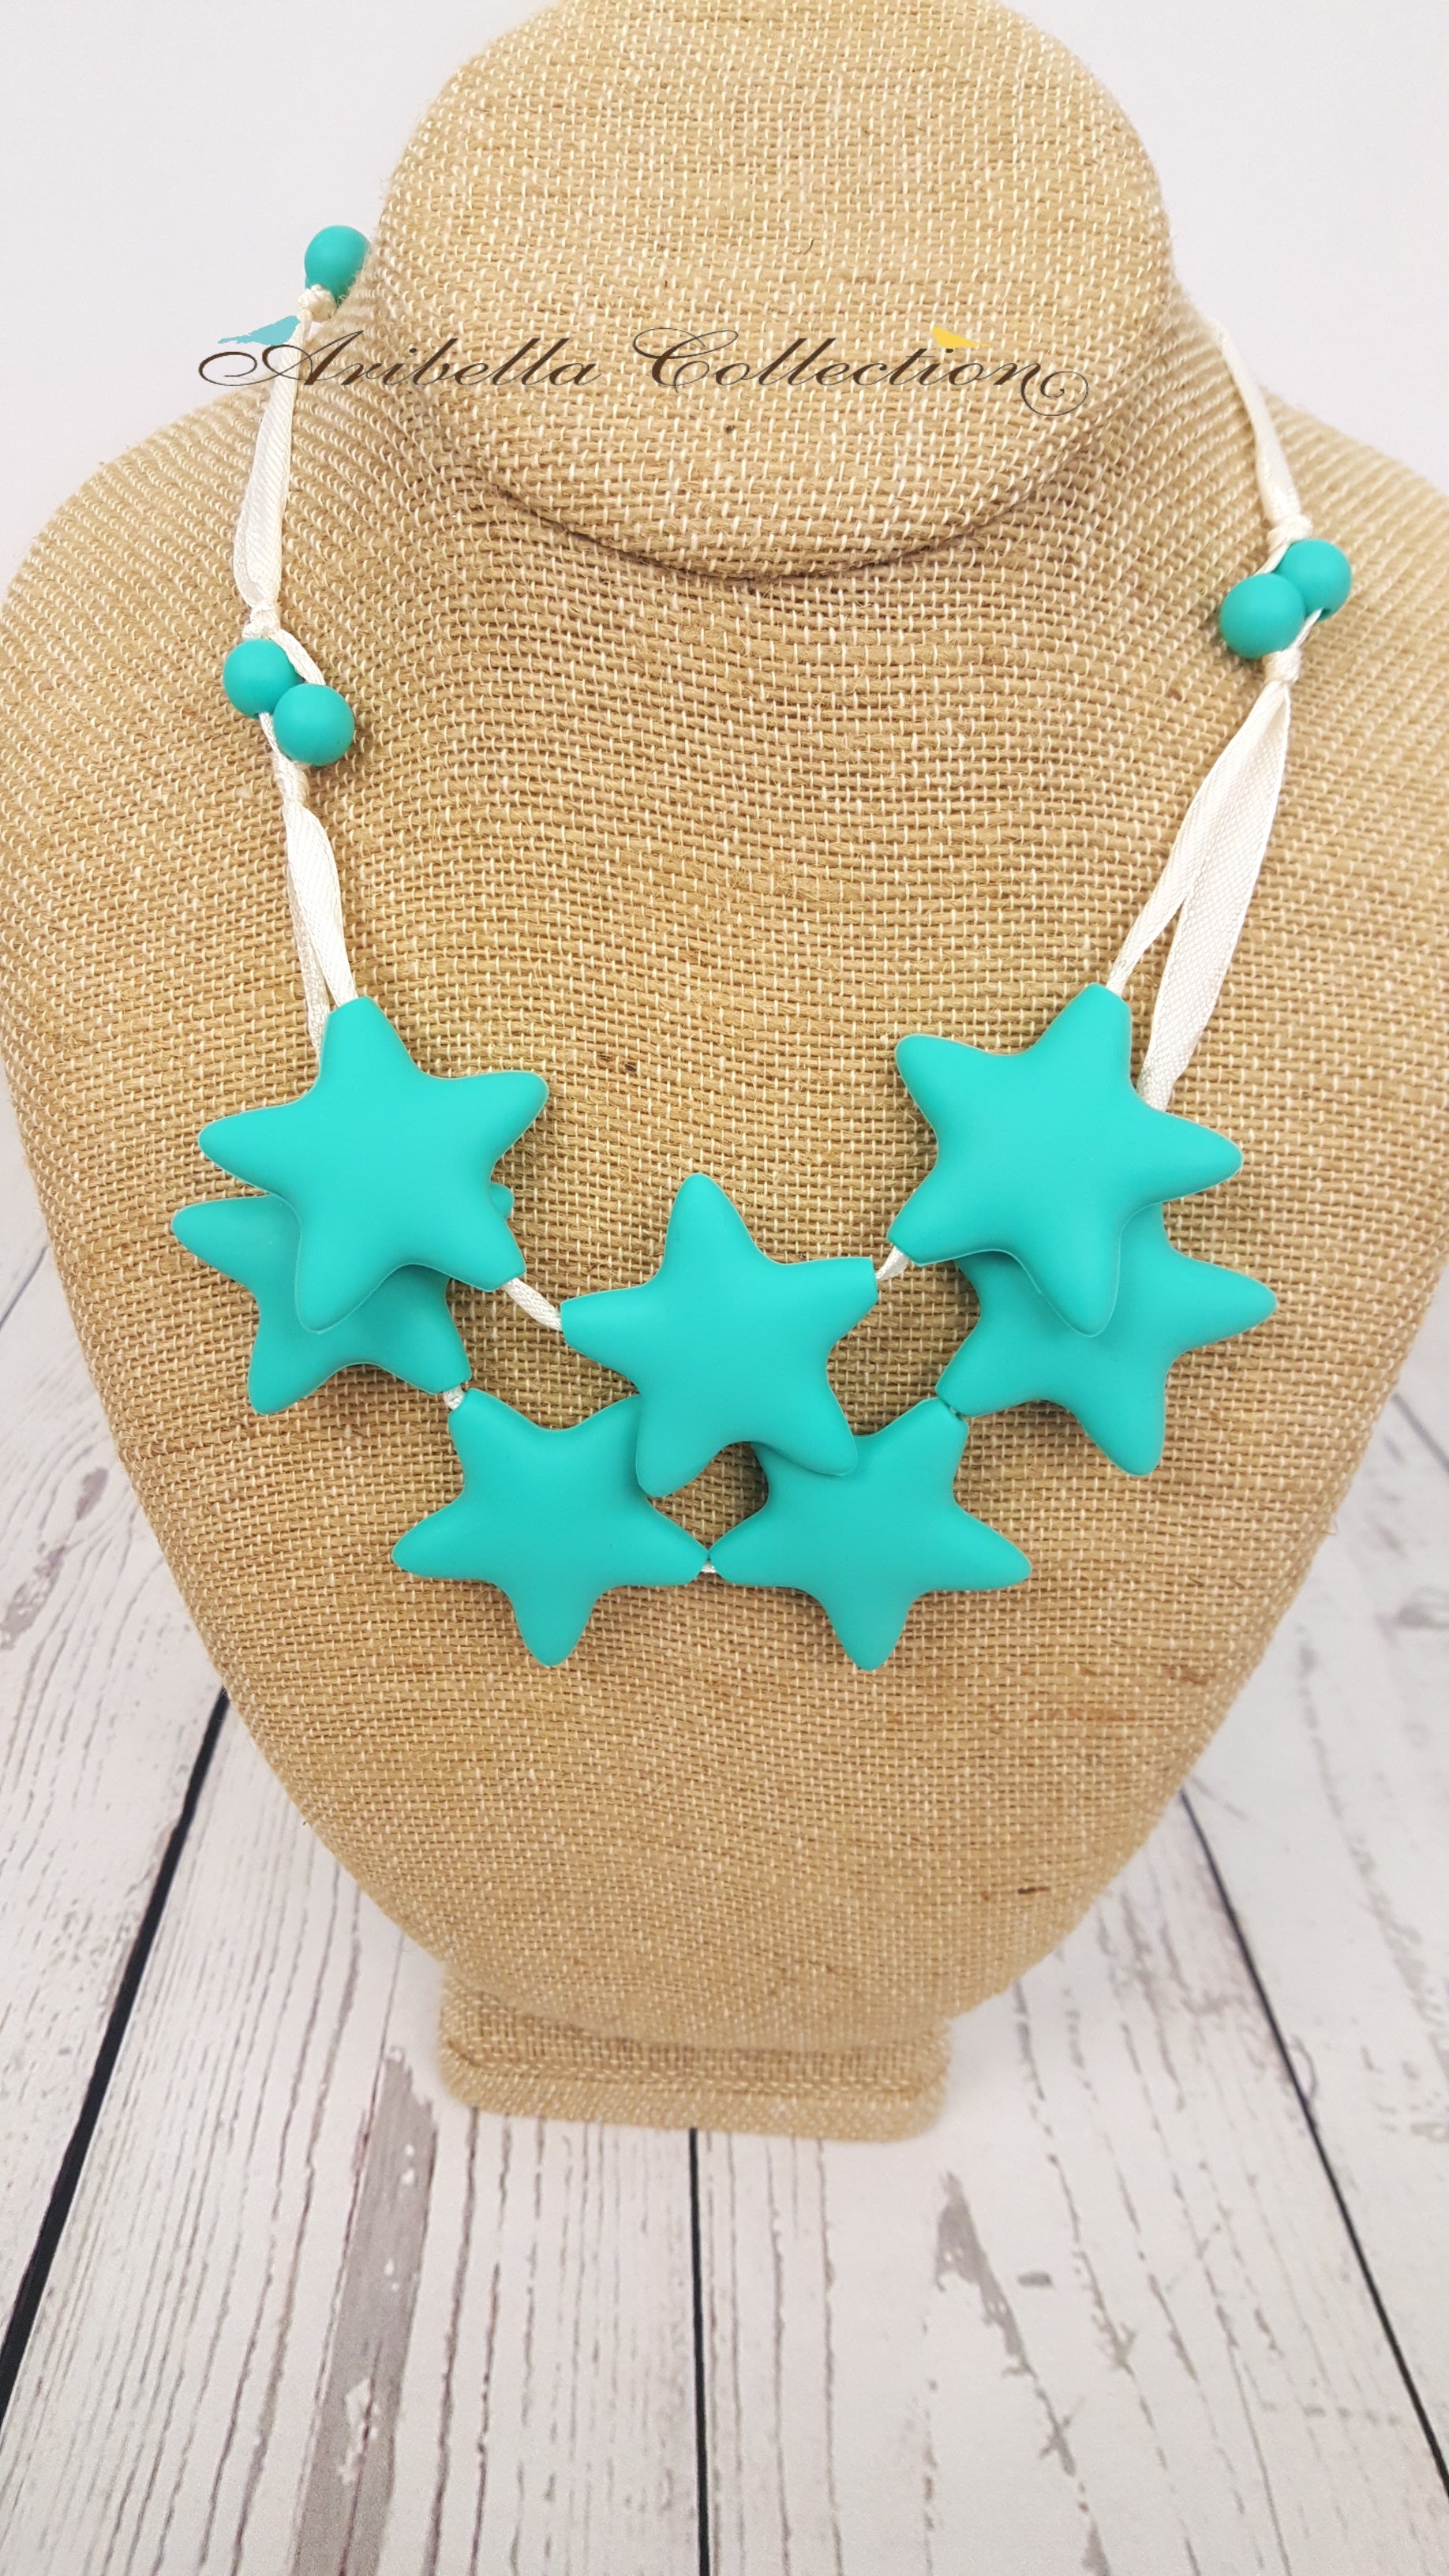 Silicone Necklace - 7 Turquoise Star - Aribella Collection, Inc.